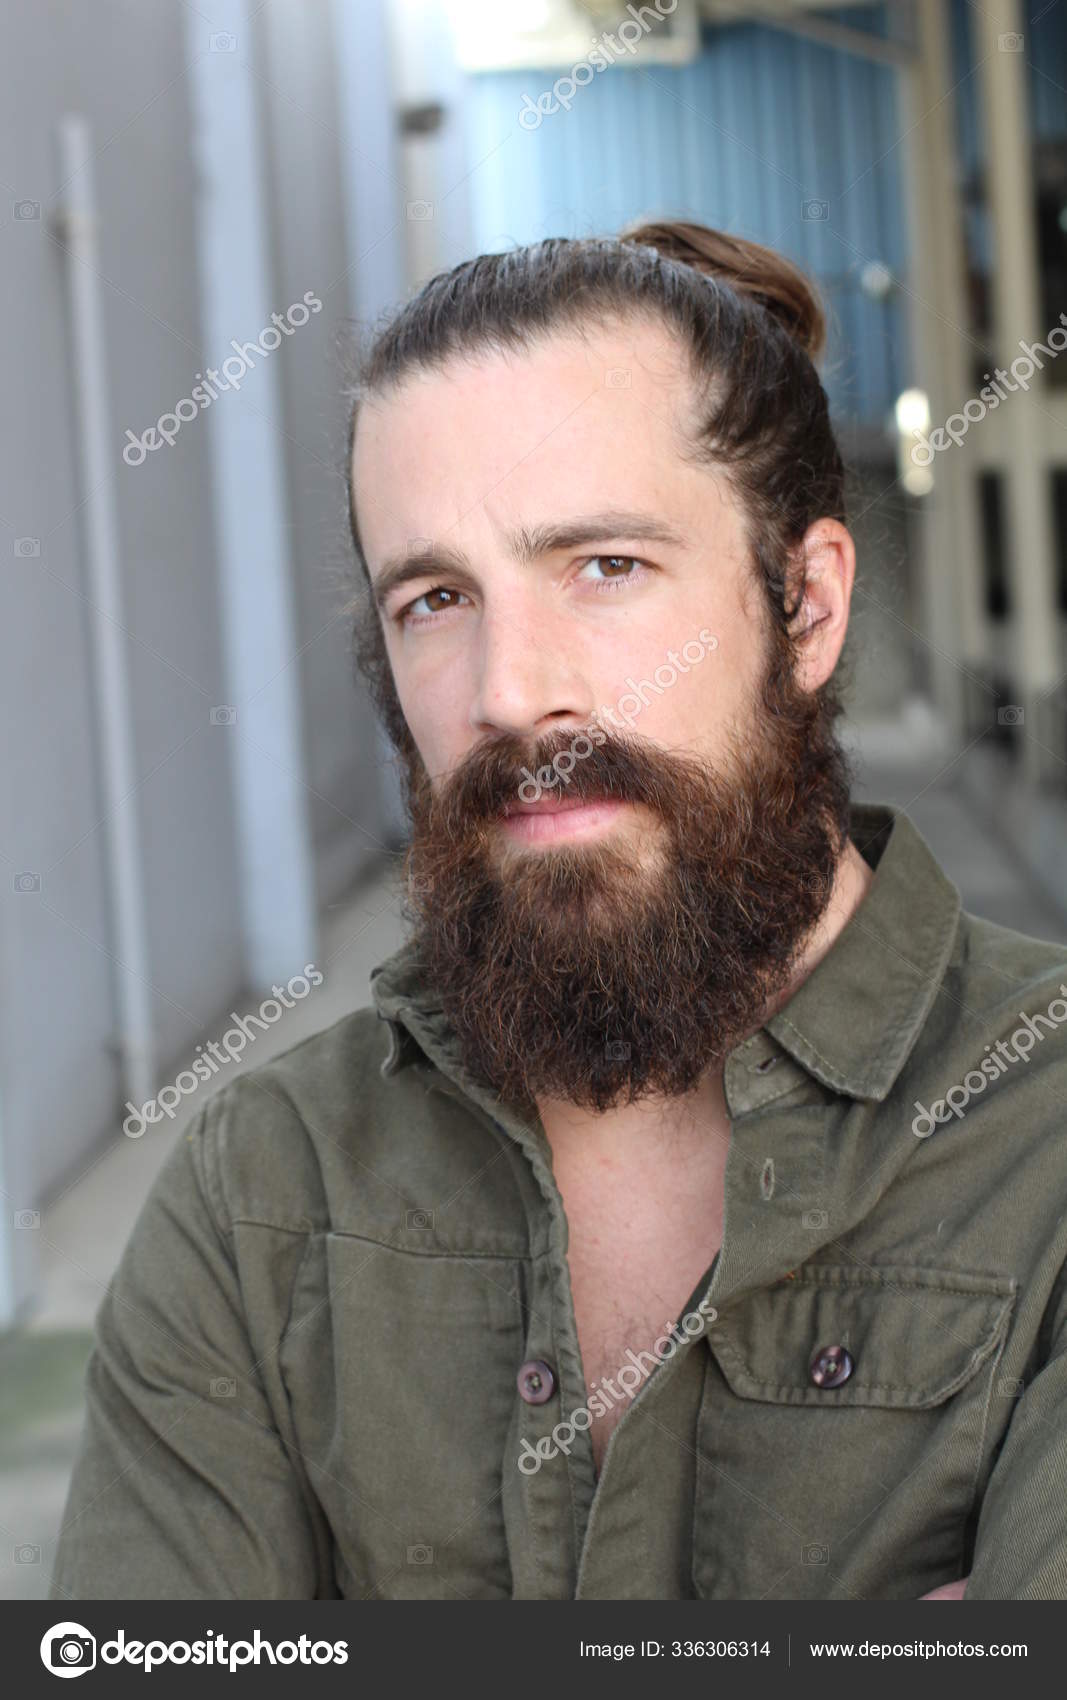 Man-Bun-Hairstyles-for-Bearded-Men - Mens Hairstyle 2020